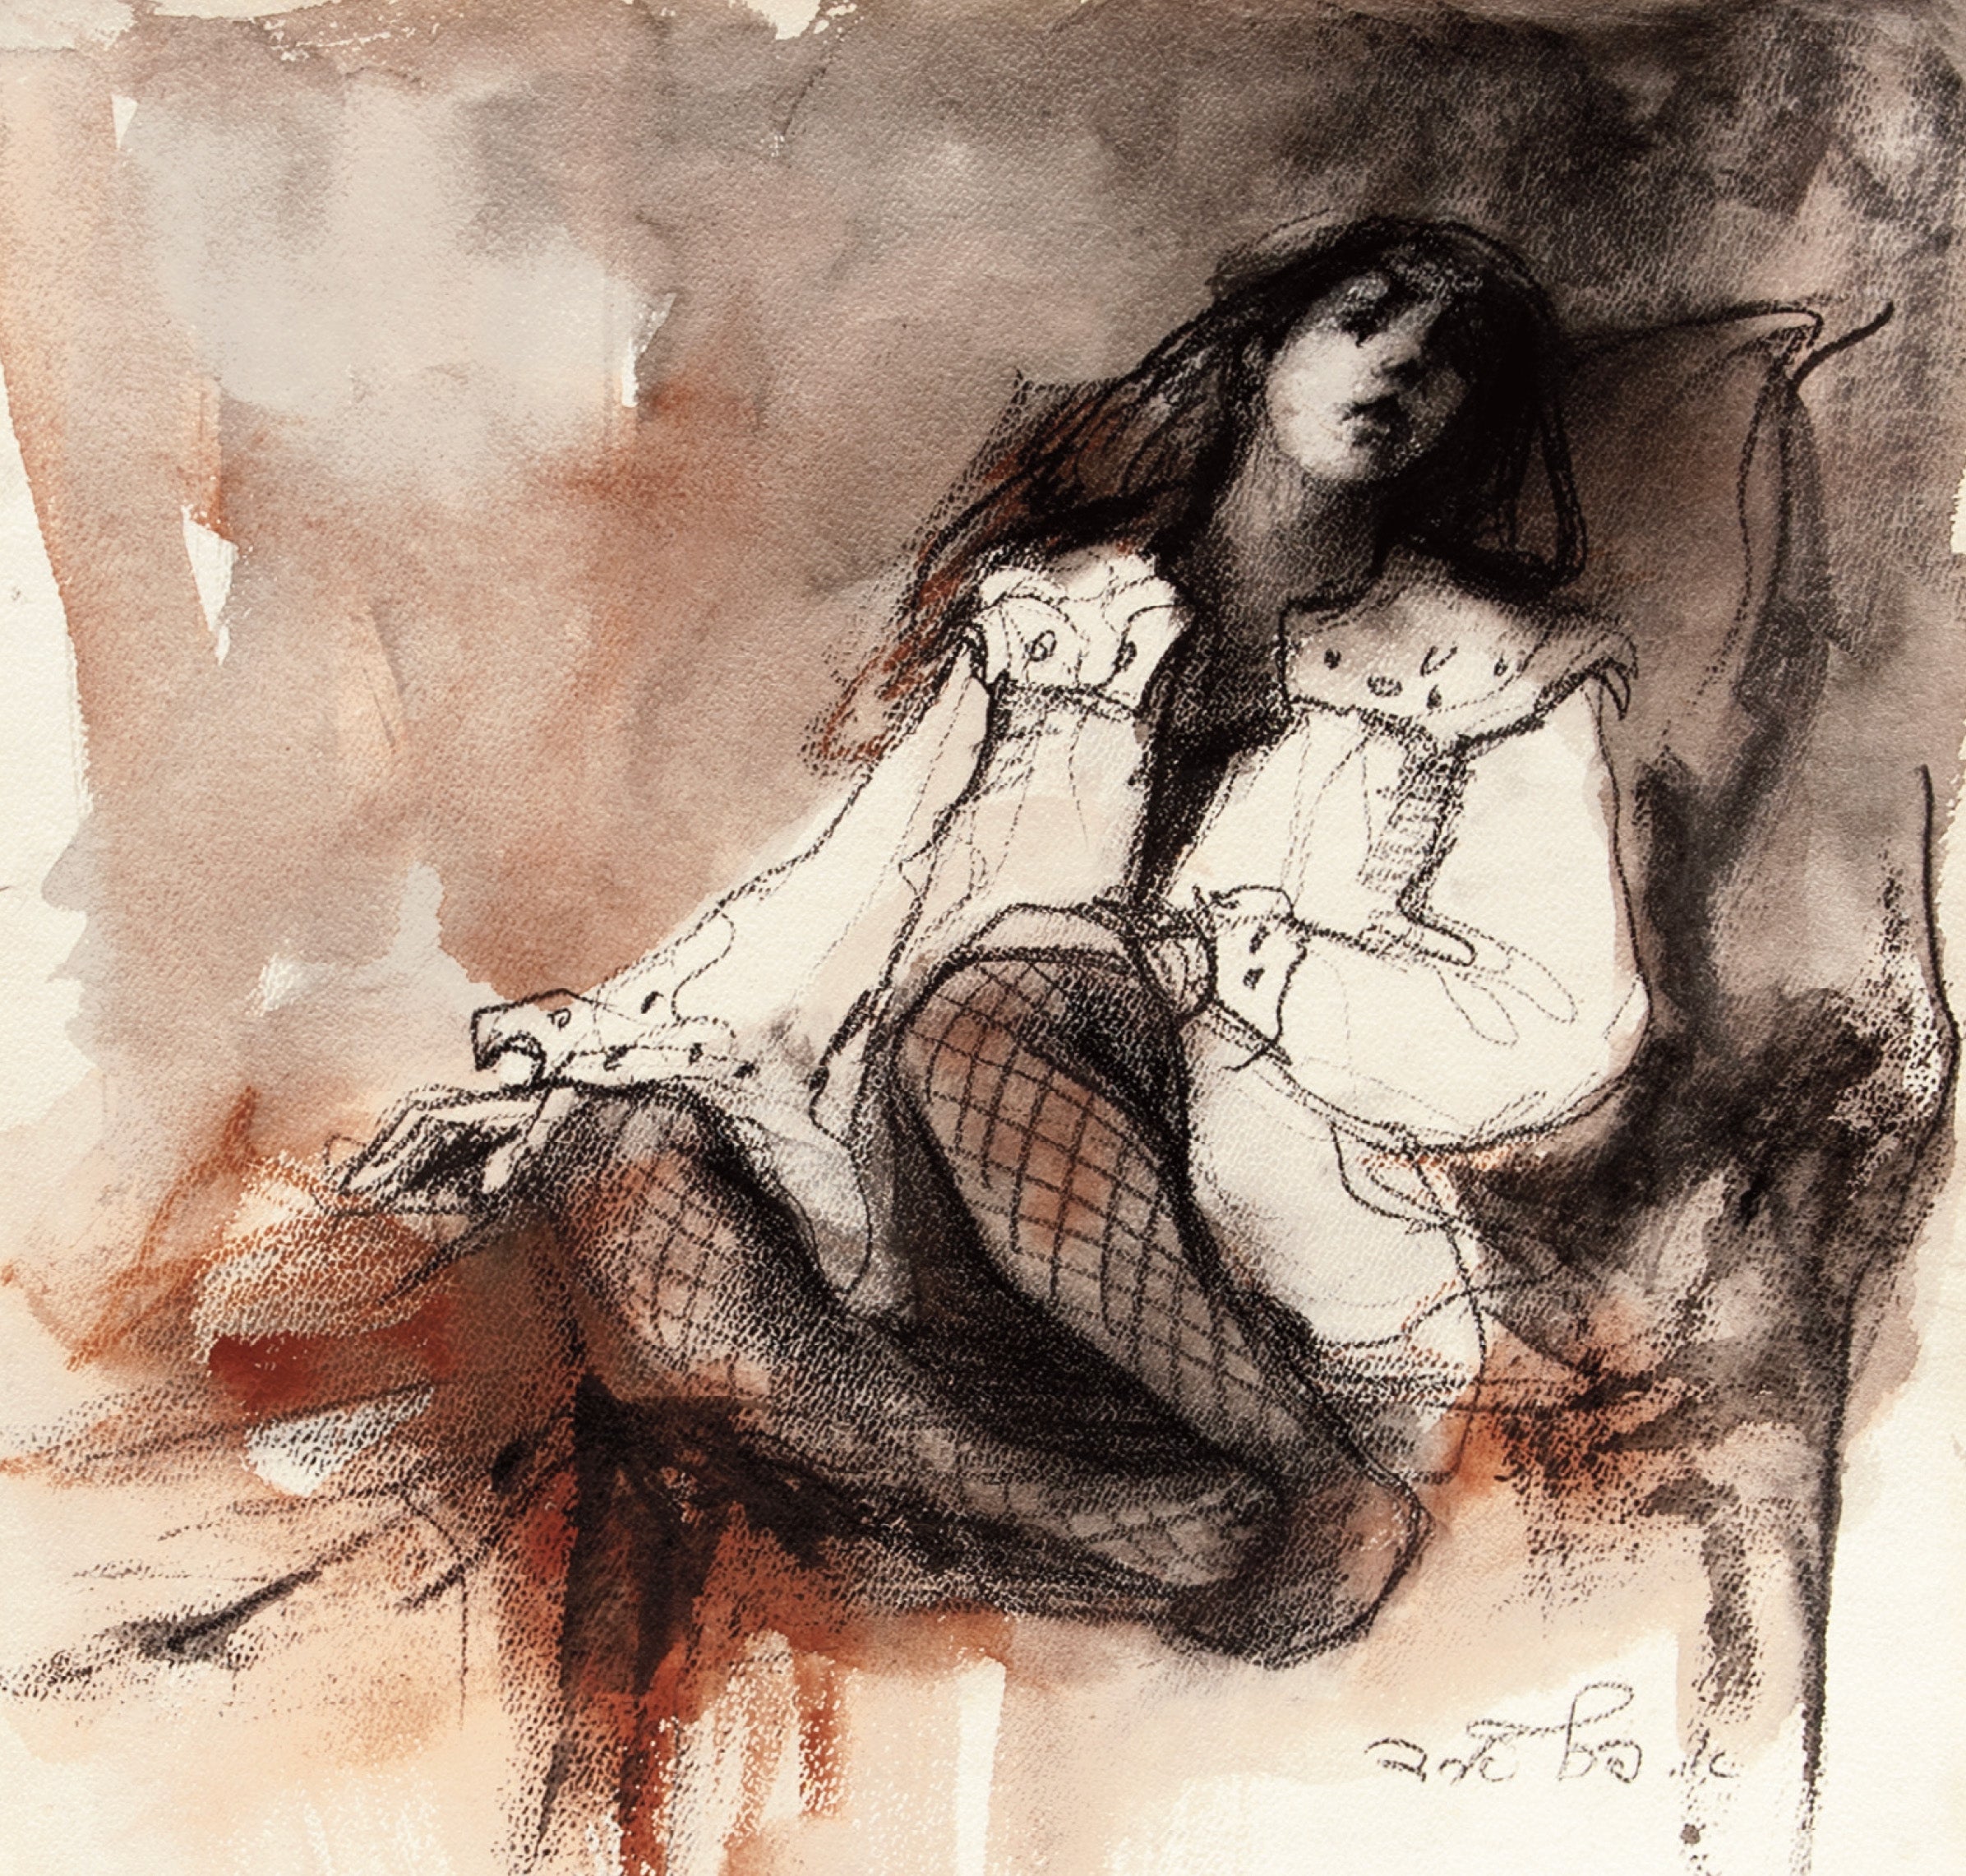 Esther Peretz-Arad, Girl in Fishnet Stockings, charcoal & wash